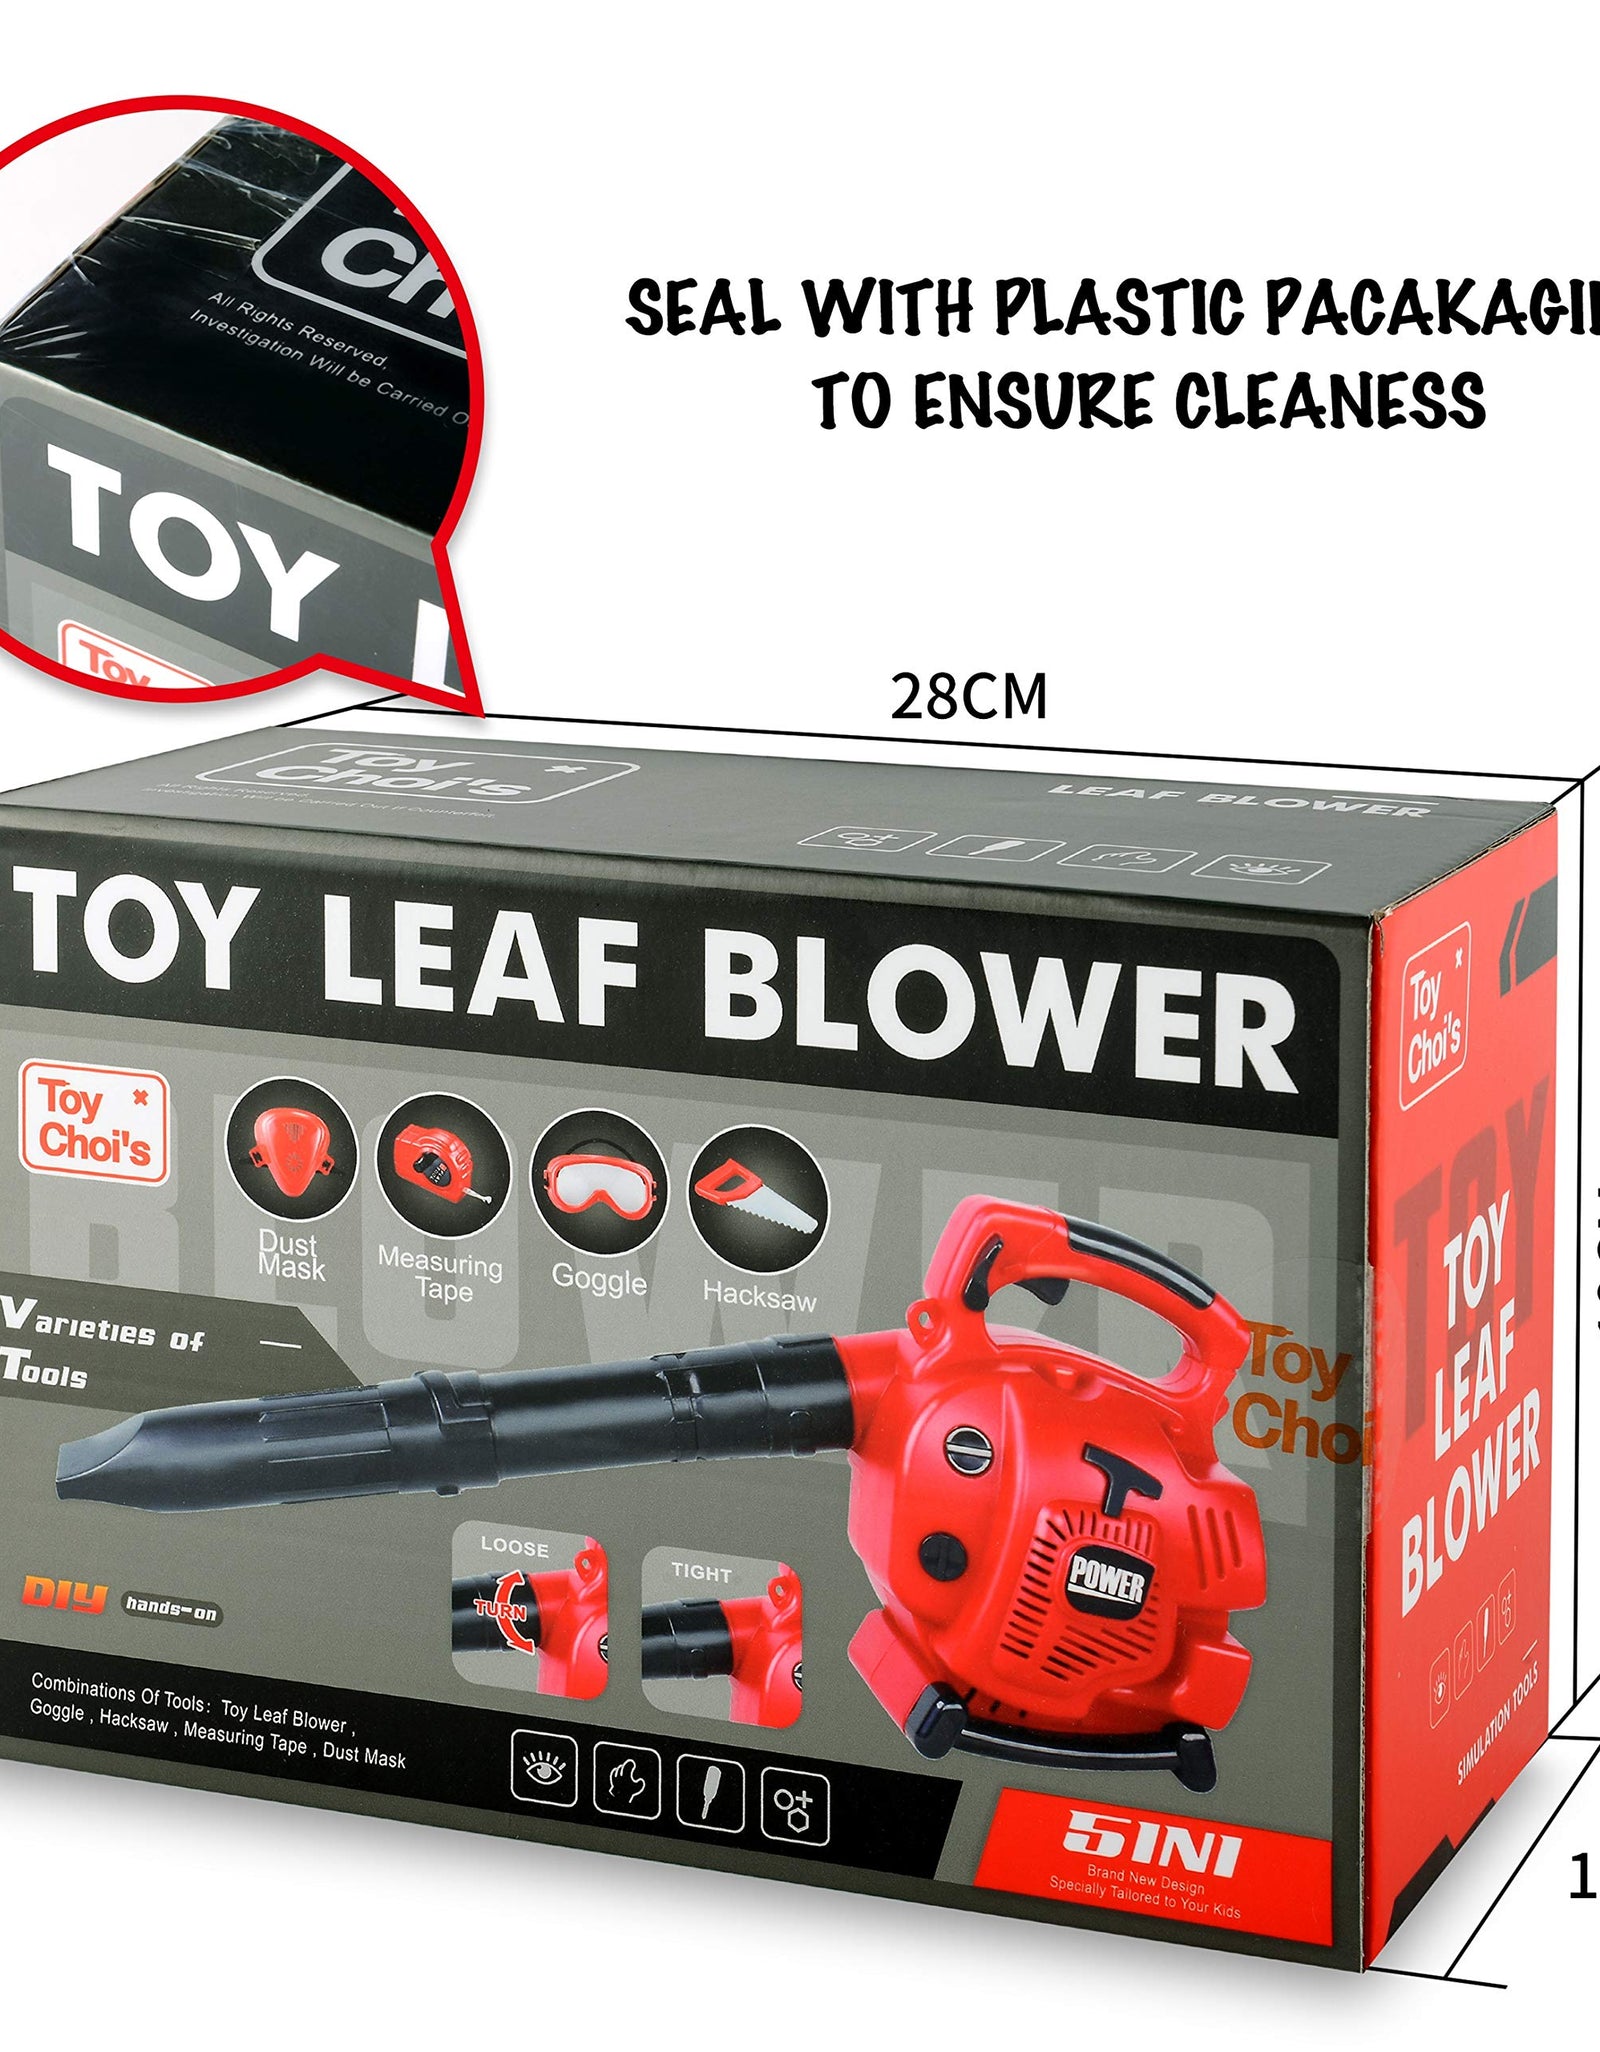 Toy Choi's Pretend Play Series Leaf Blower Toy Tool Play Set, Outside Construction Work Shop Toy Tool Kit Outdoor Preschool Gardening Lawn Toy Gift for Kids Toddler Baby Children Boys and Girls